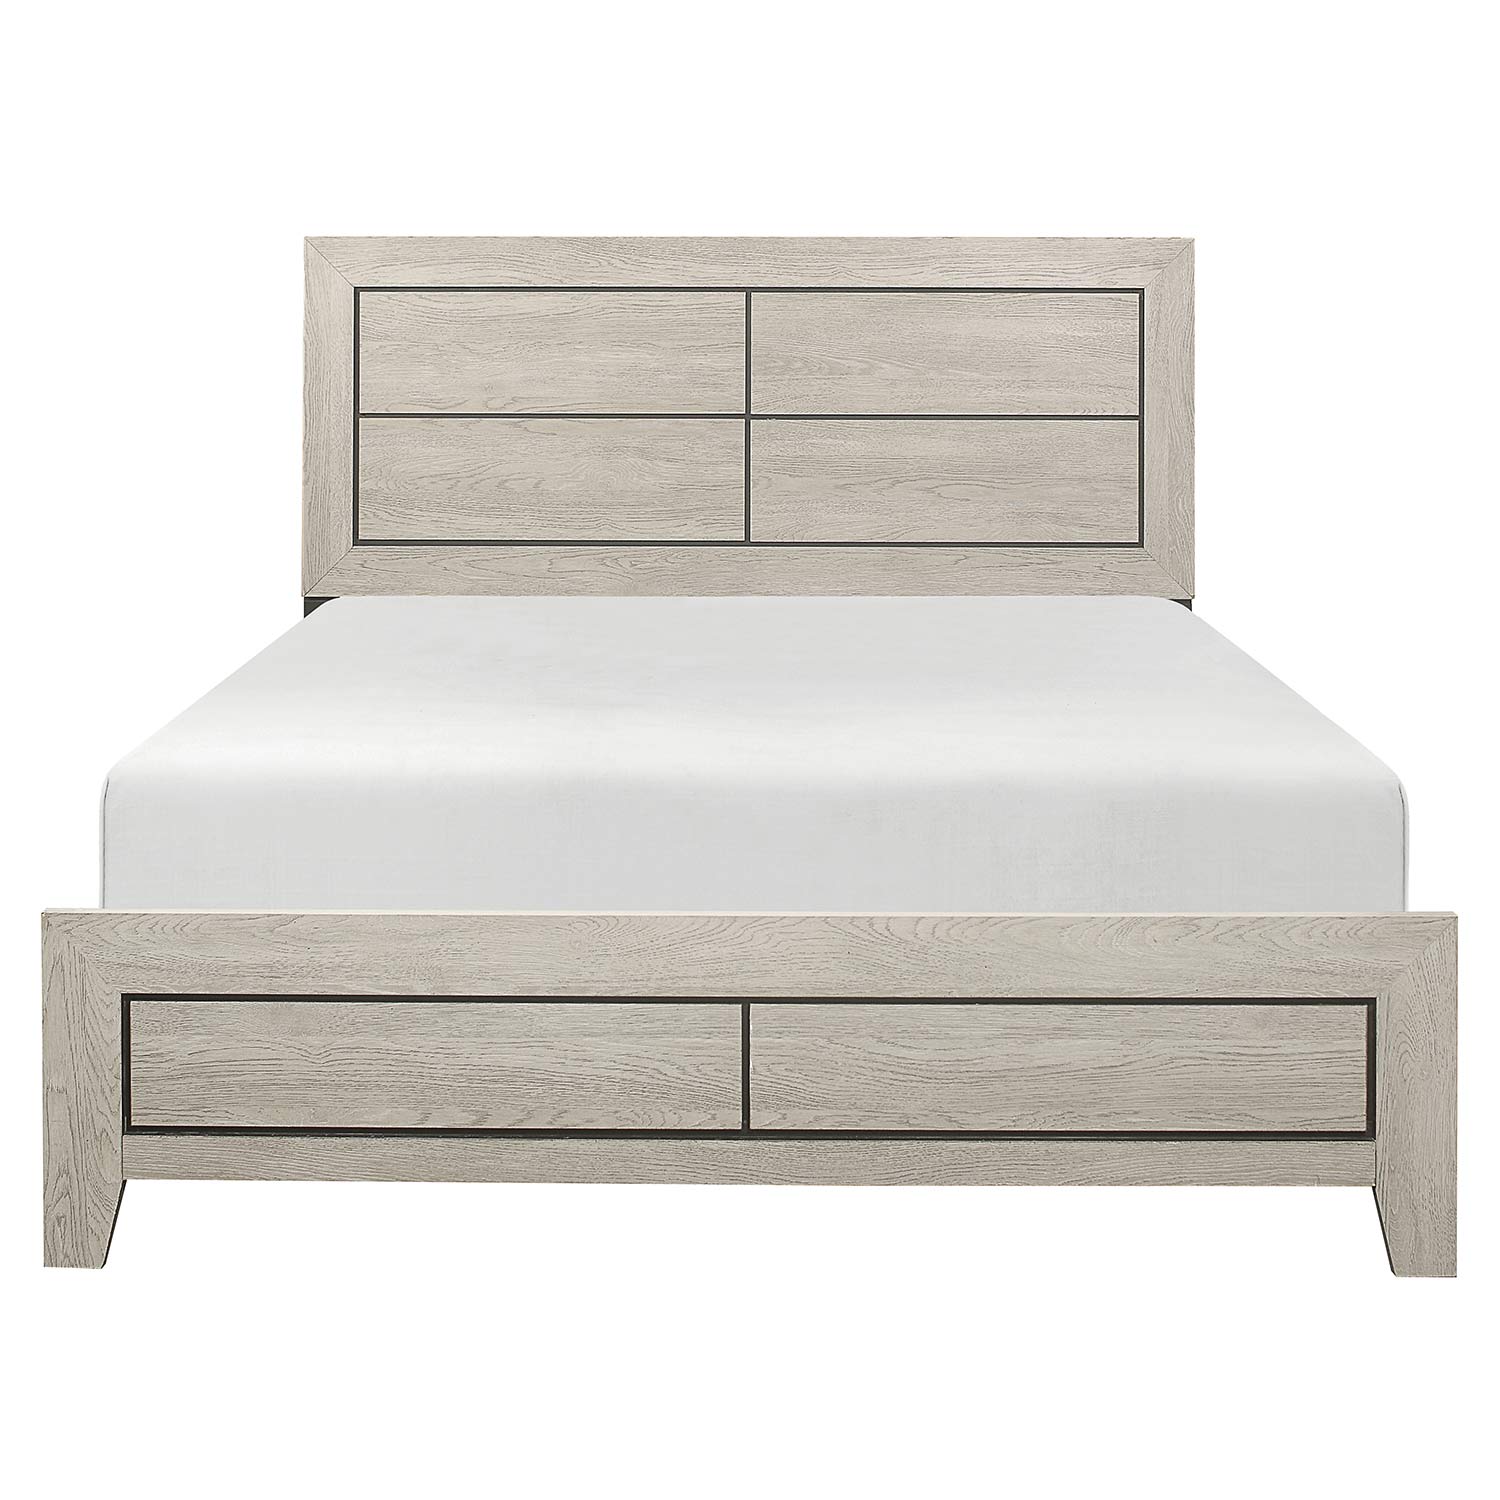 Homelegance Quinby Bed - Light Gray